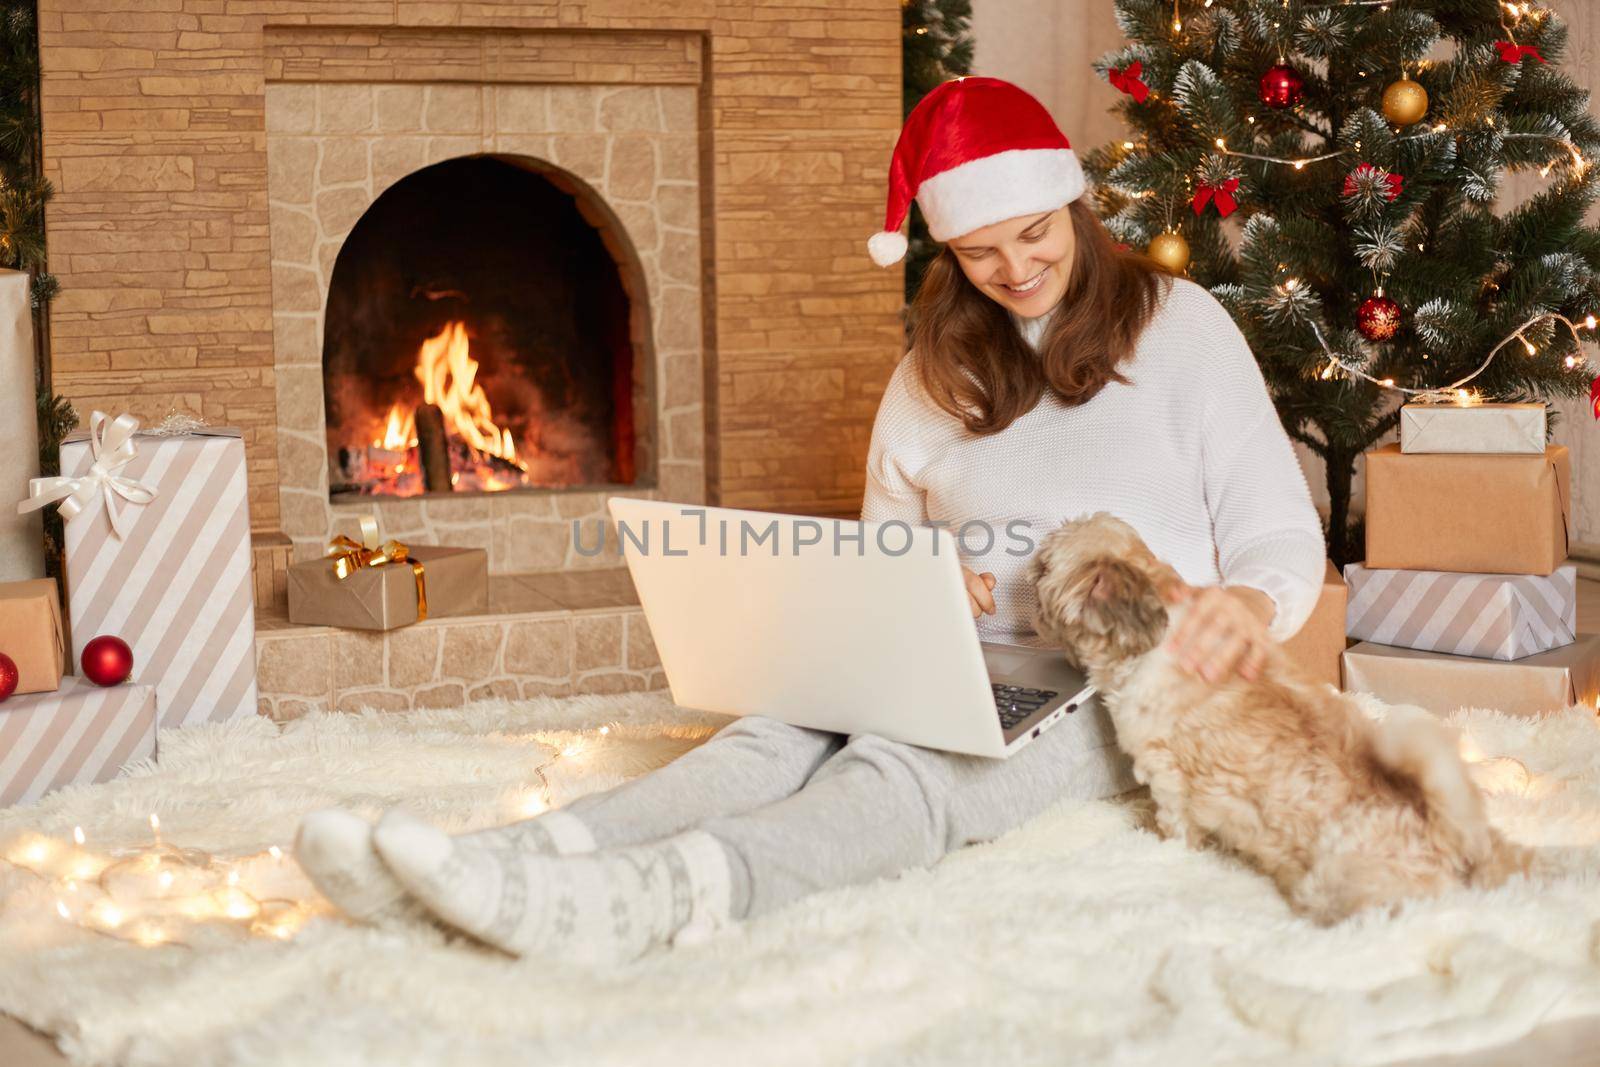 Happy girl in red hat sitting with laptop and sitting with cute dog at christmas tree with lights, fireplace and presents in festive room, female looking at her pekingese puppy with happy look.